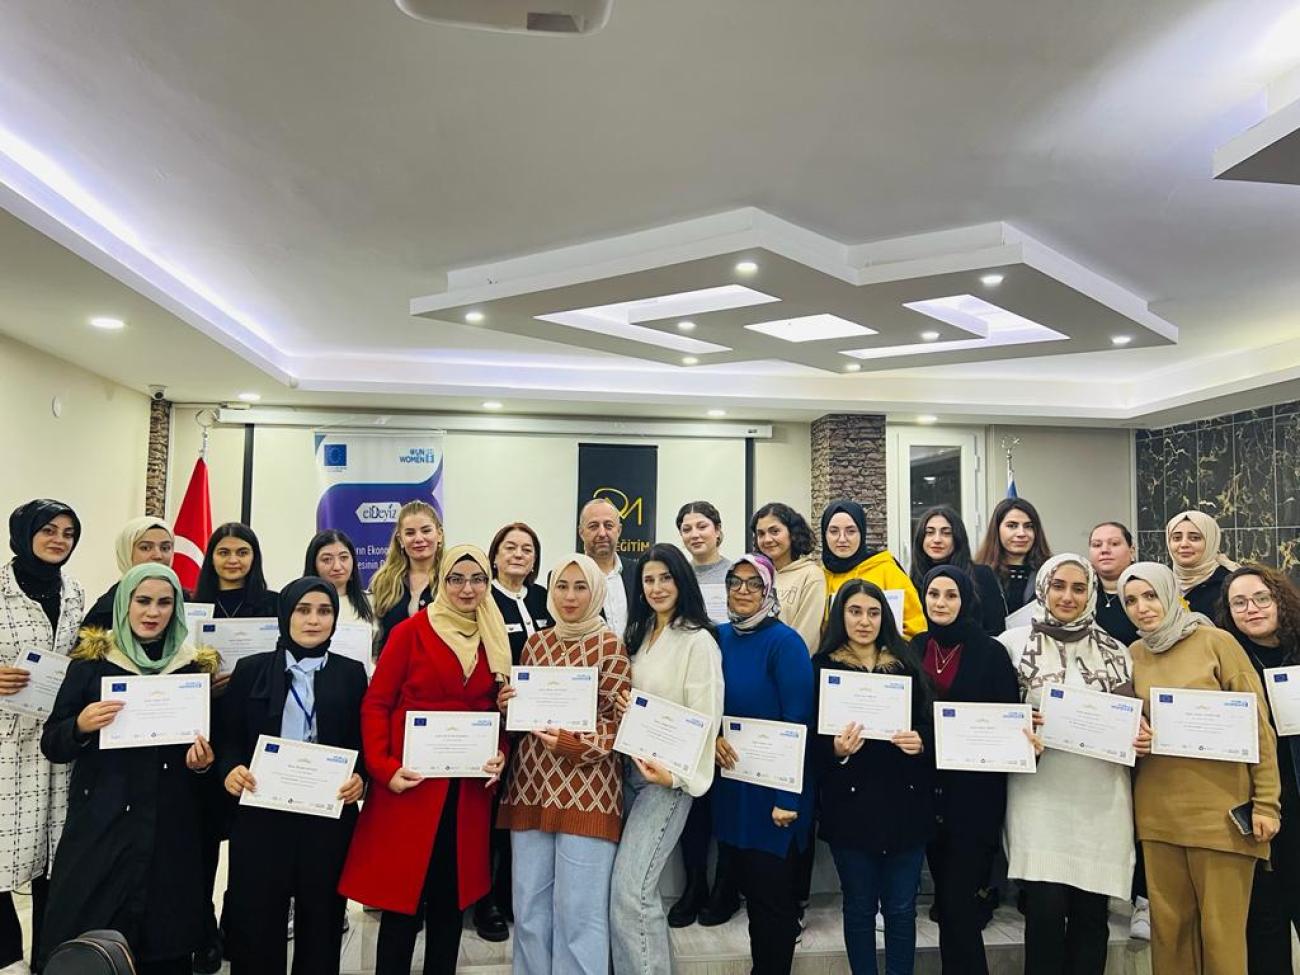 Women after a training pose together with certificates in their hands.